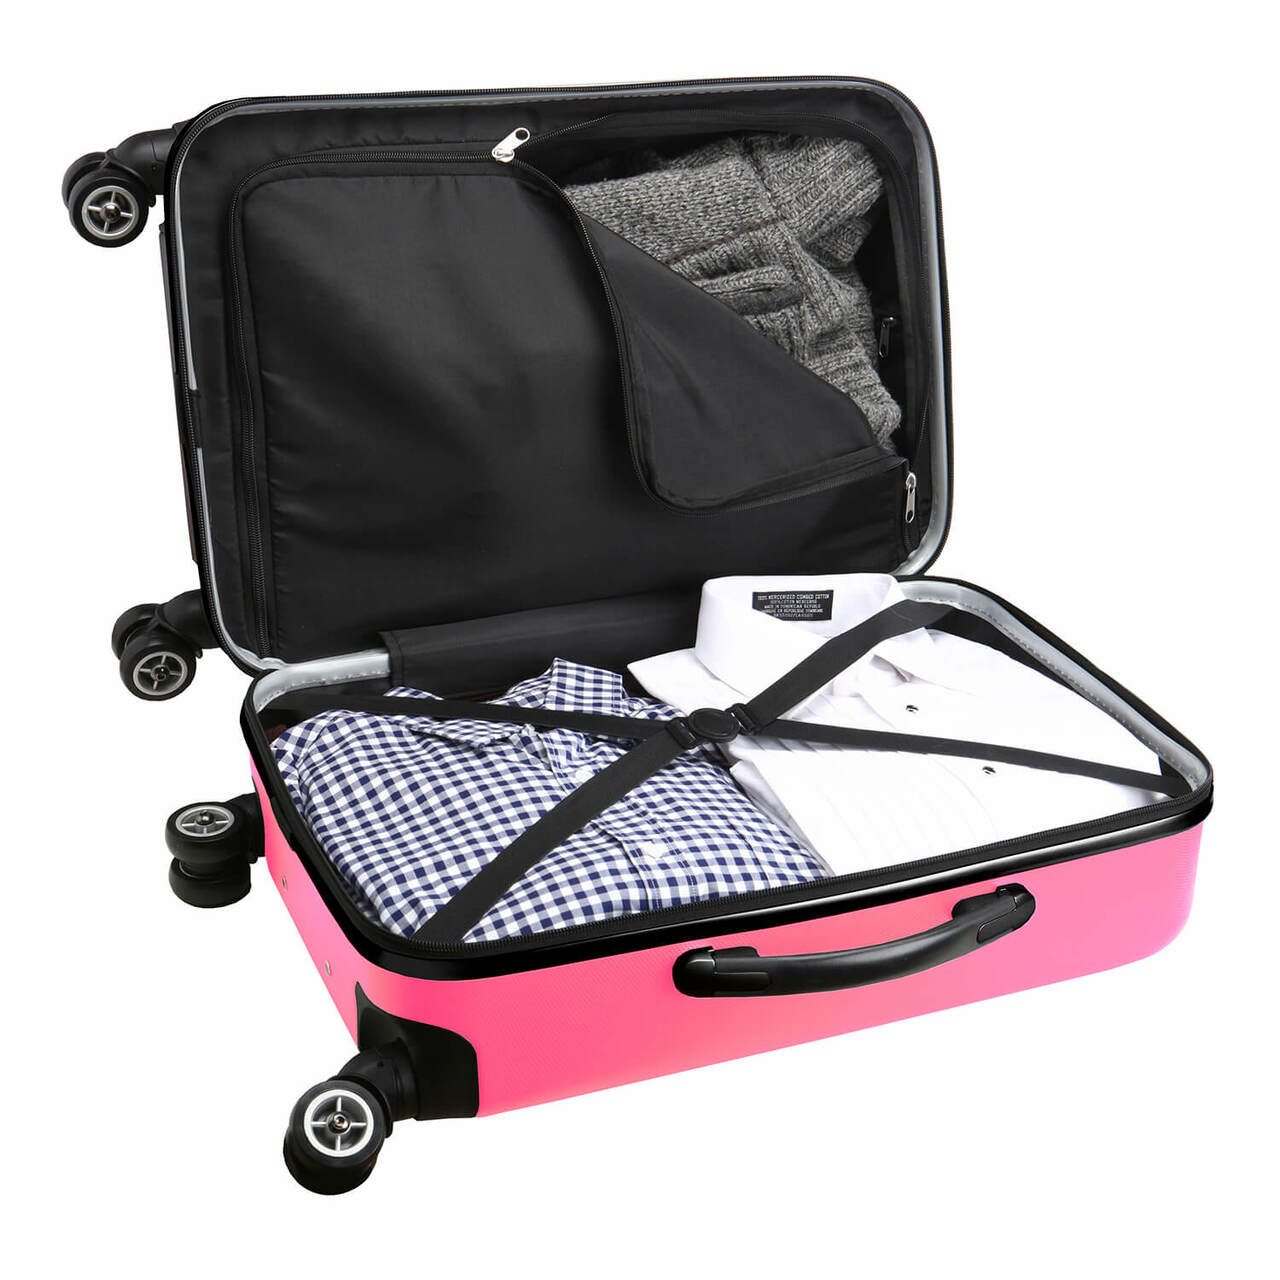 Chicago Bulls 20" Pink Domestic Carry-on Spinner